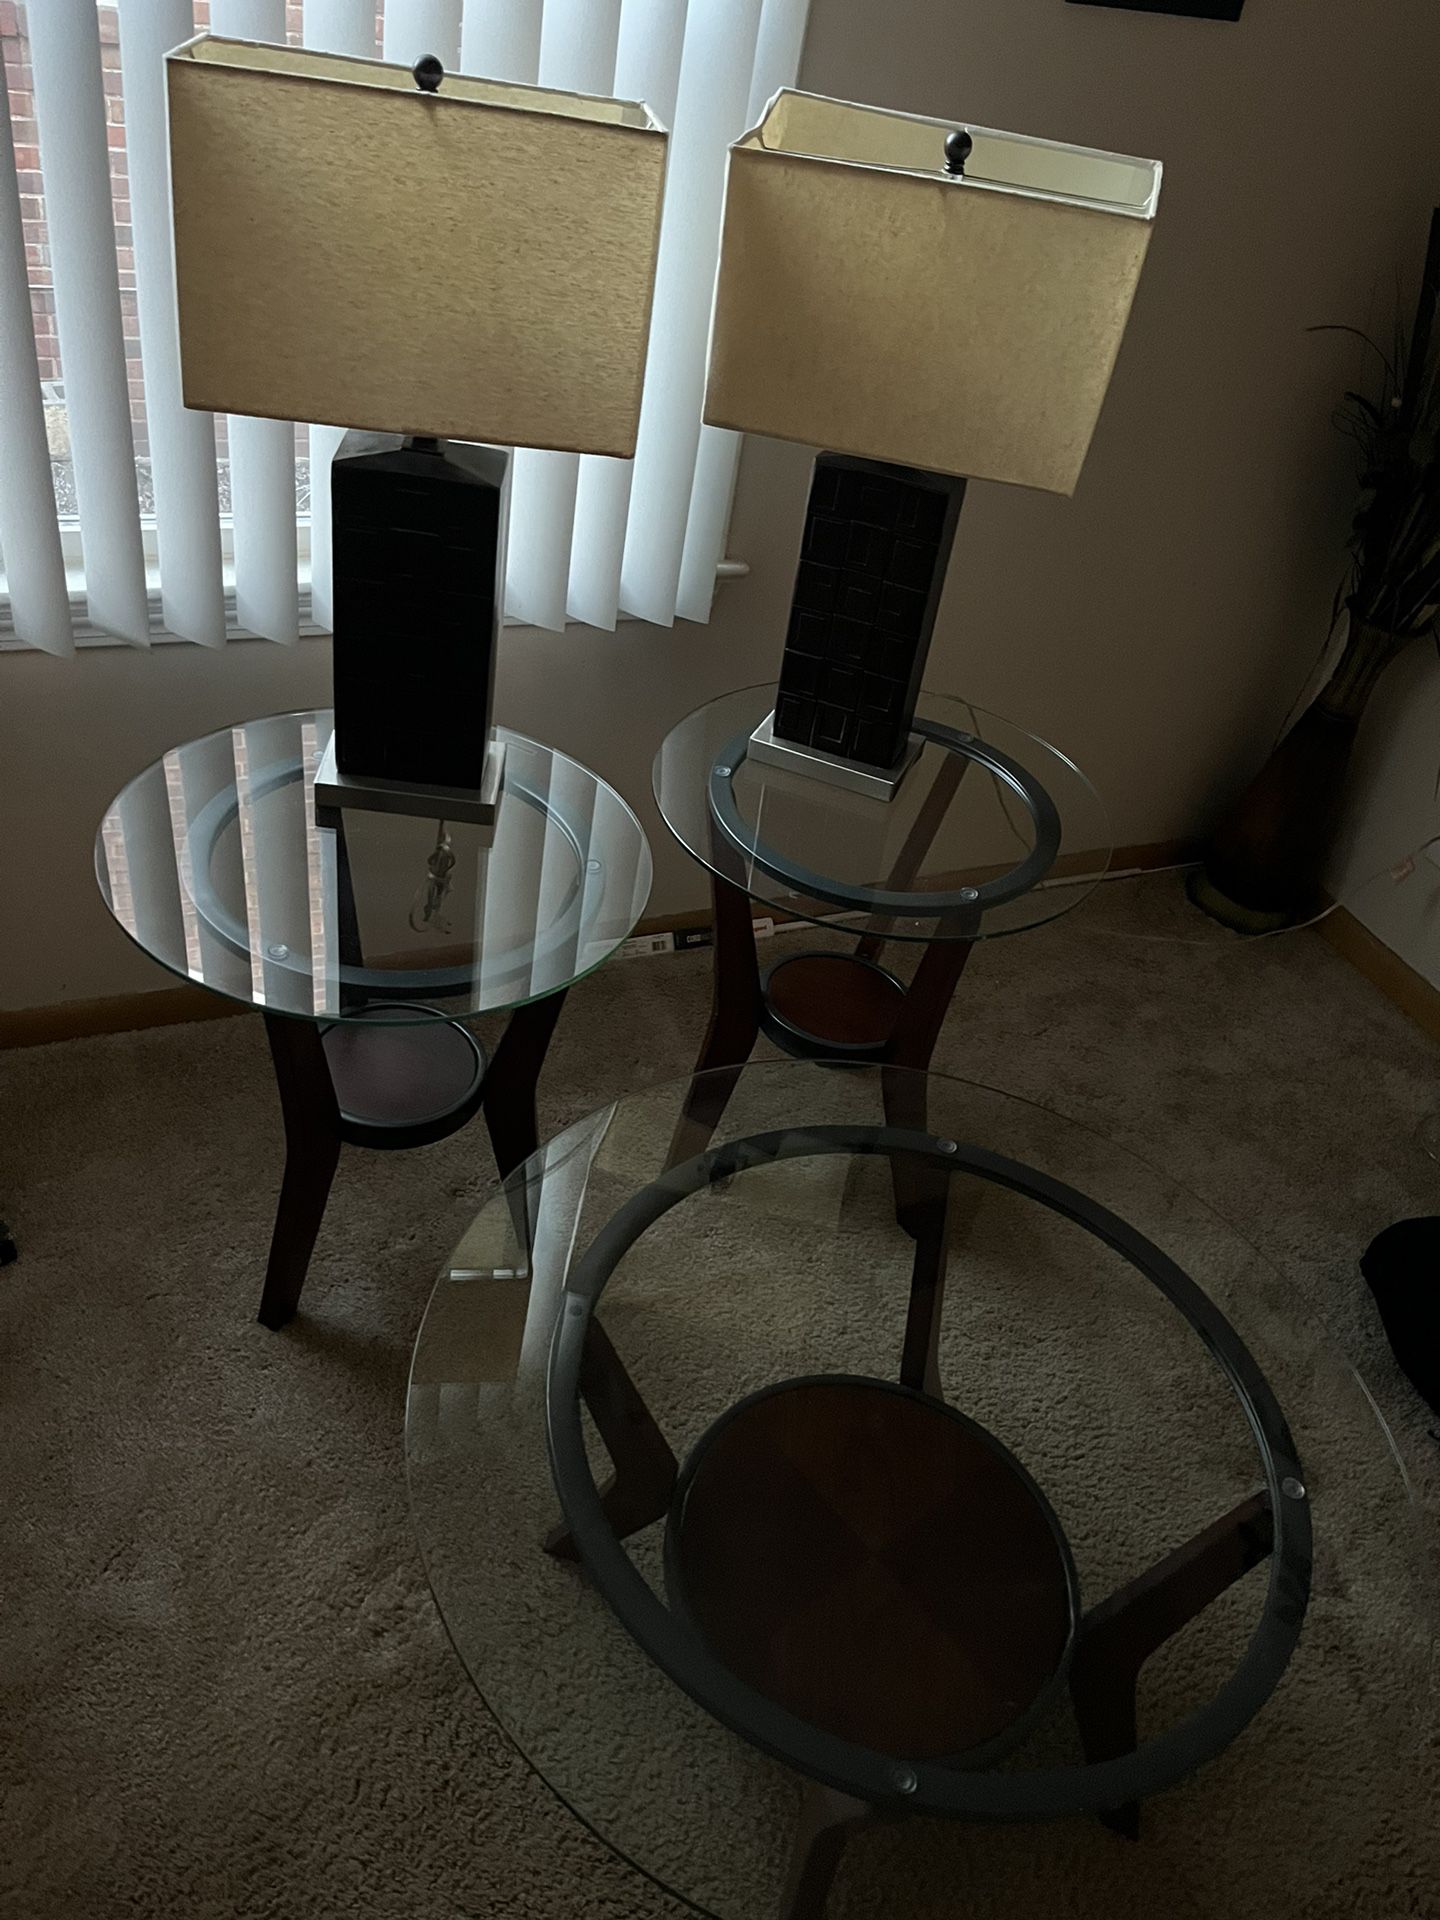 Coffee and end tables with Lamps